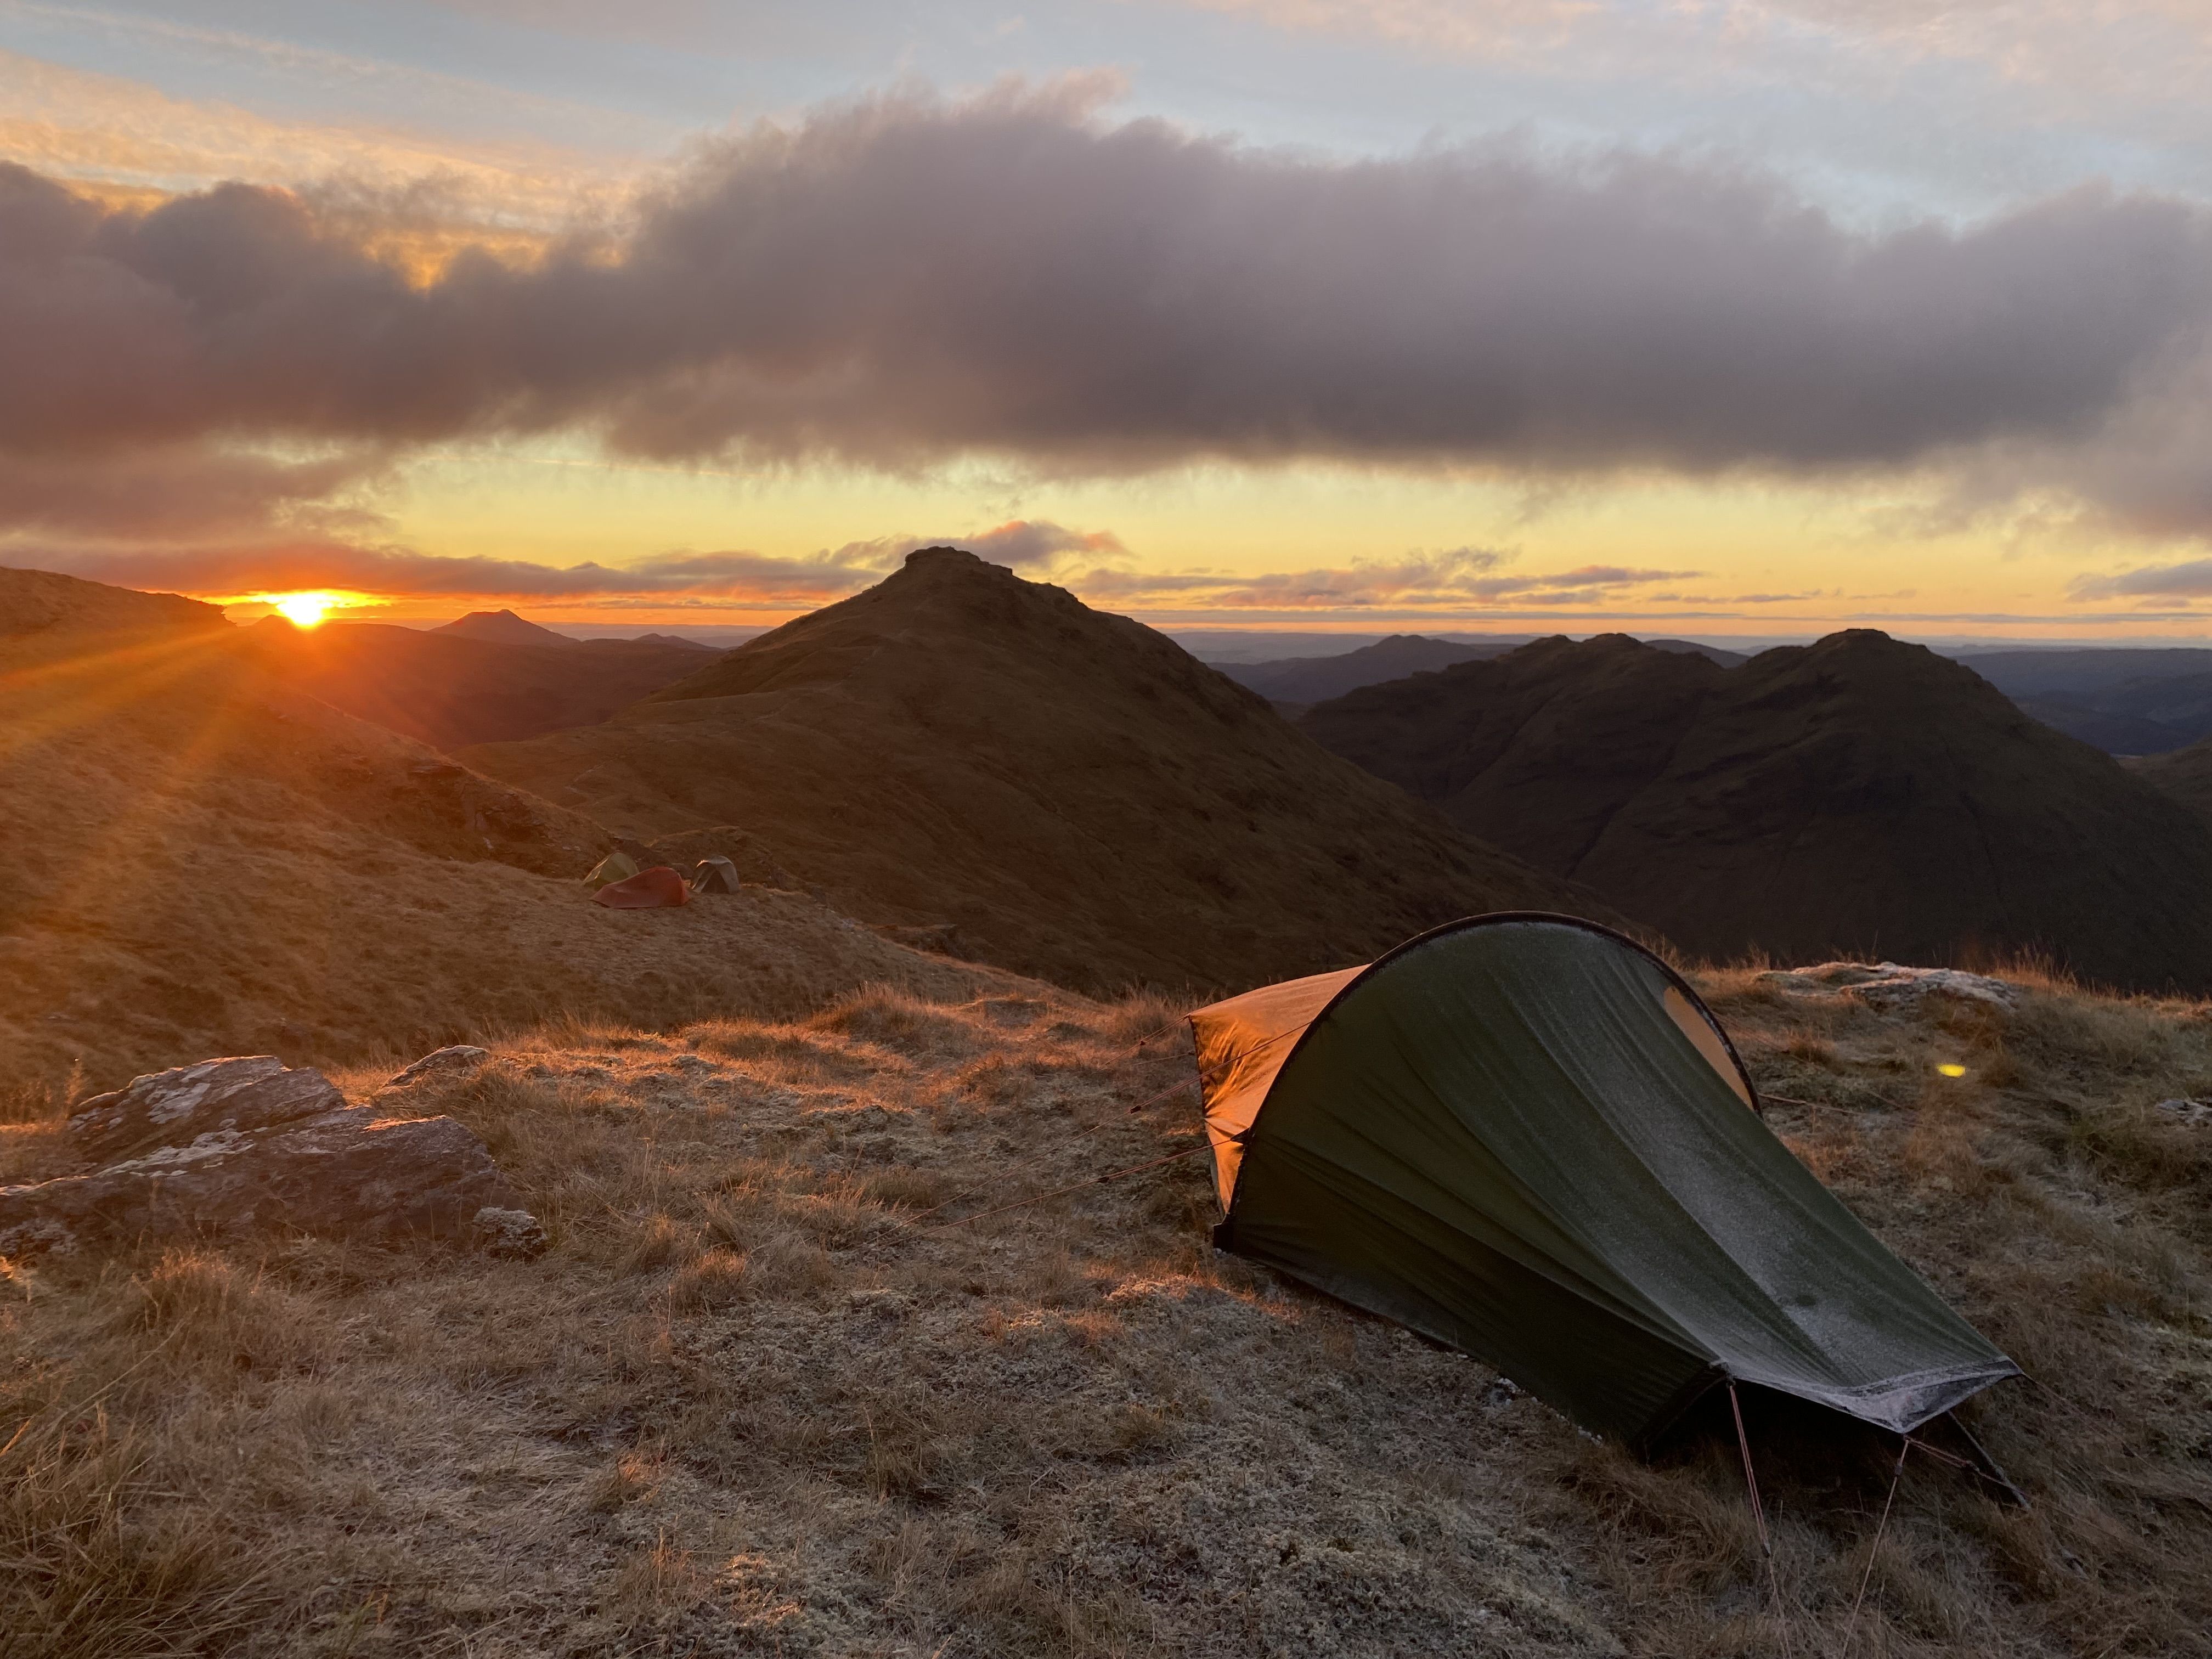 One-person tents: 10 the